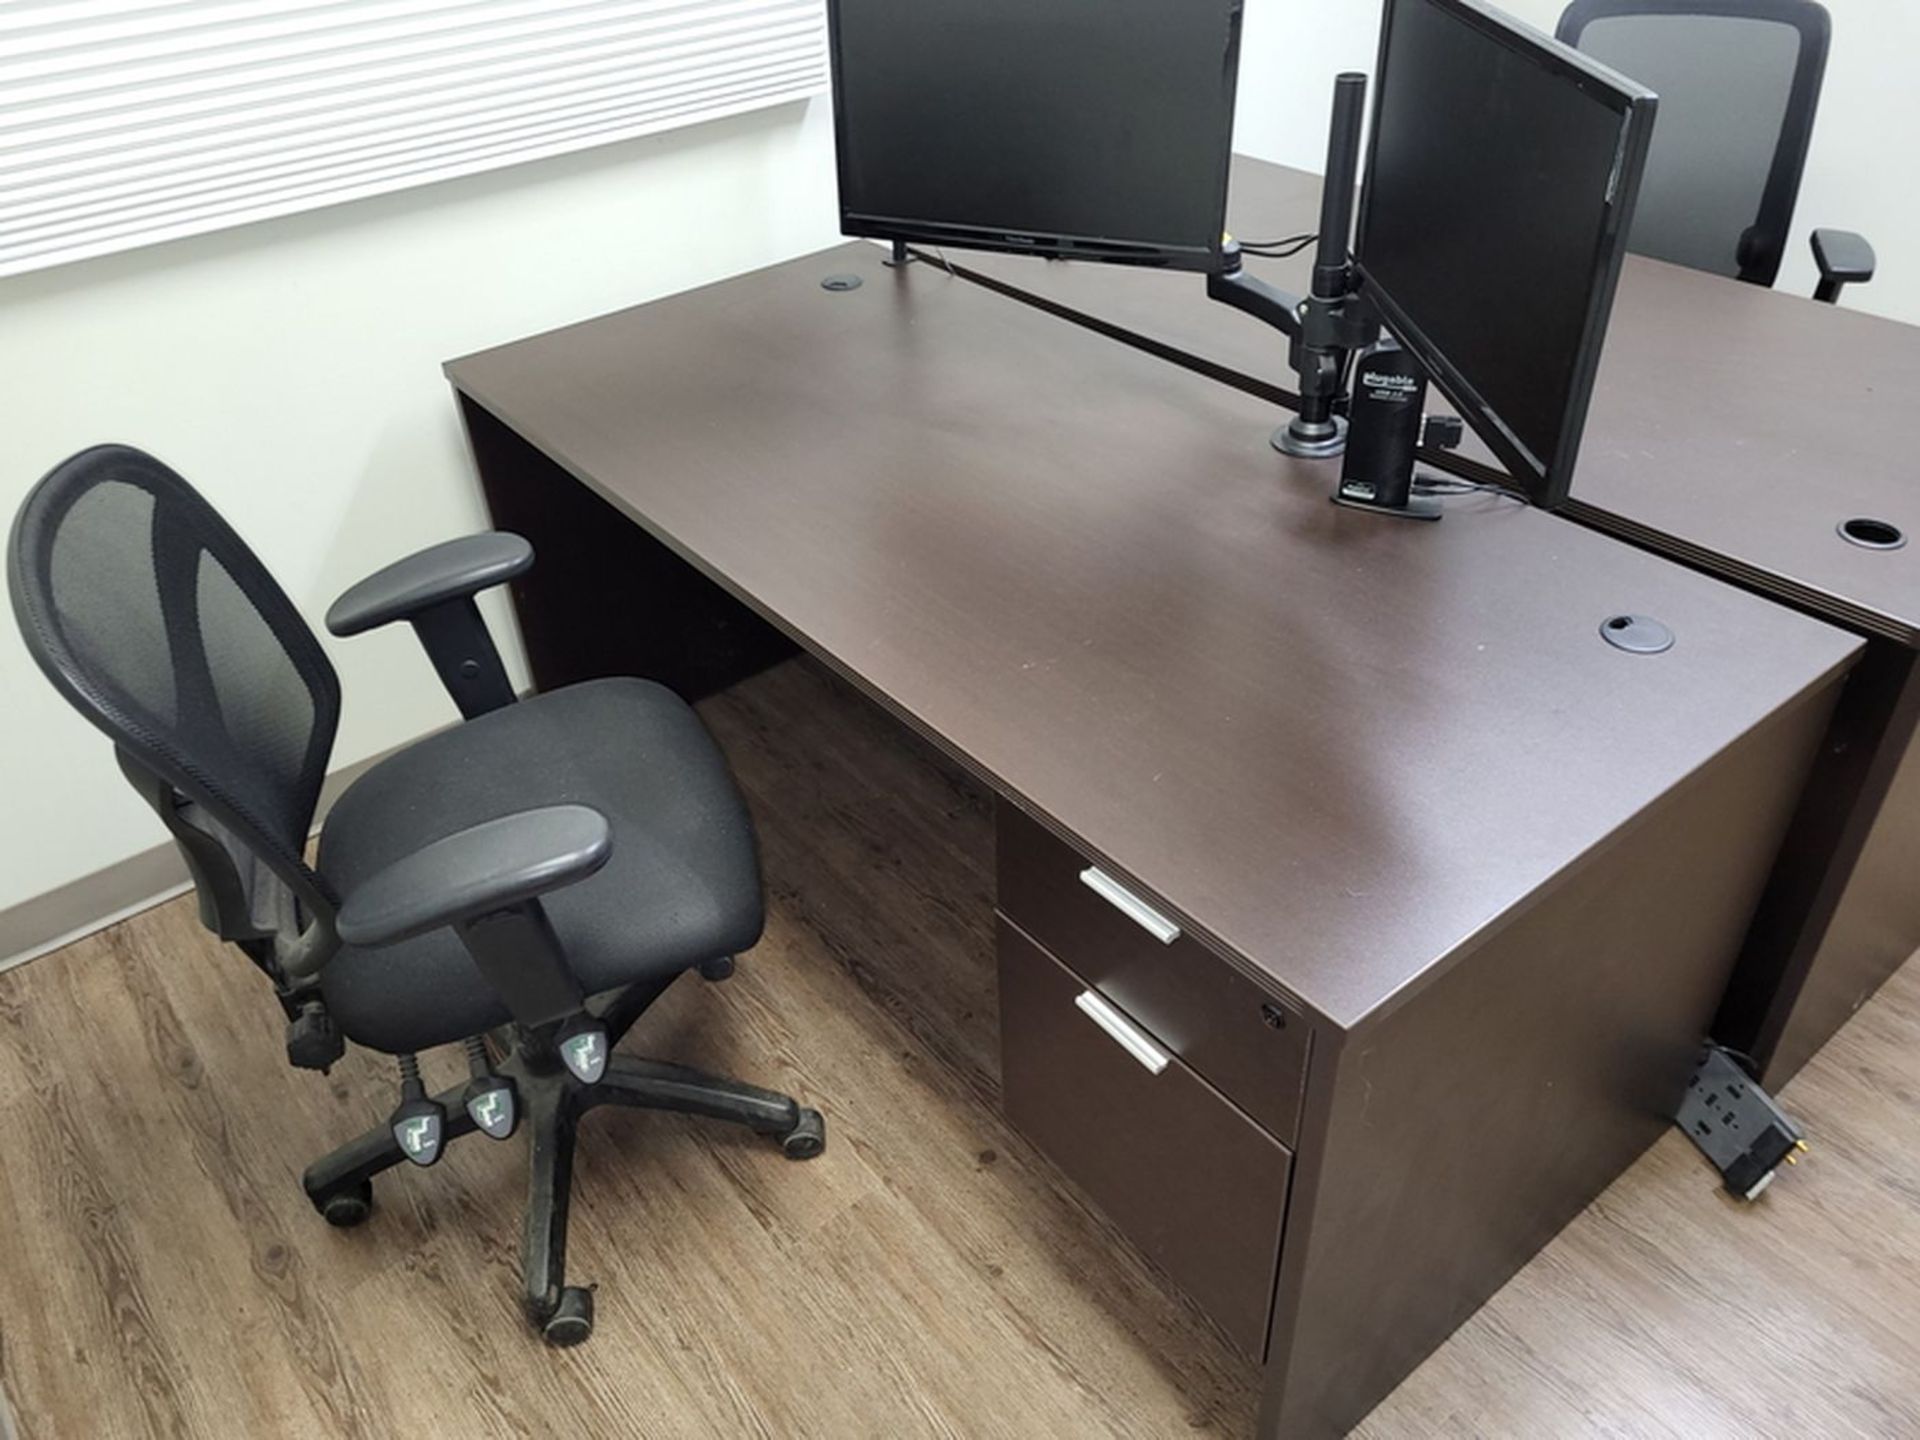 Lot - (2) Wood Desks; (2) Swivel Chairs, (1) Desk Includes Dual Monitors and Stand